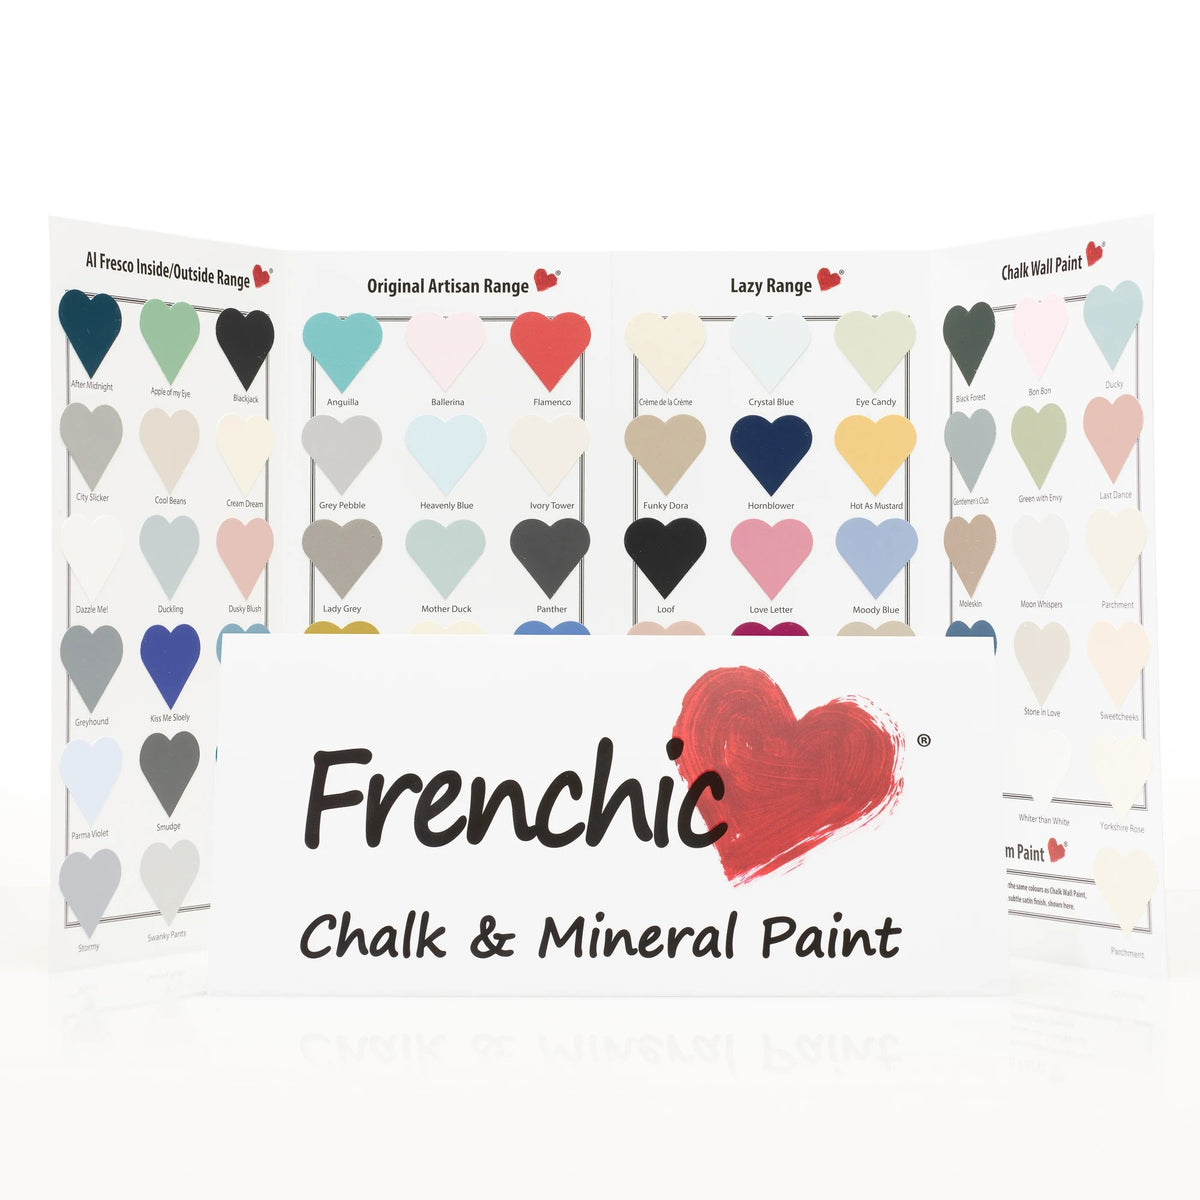 New 2021 FRENCHIC color map